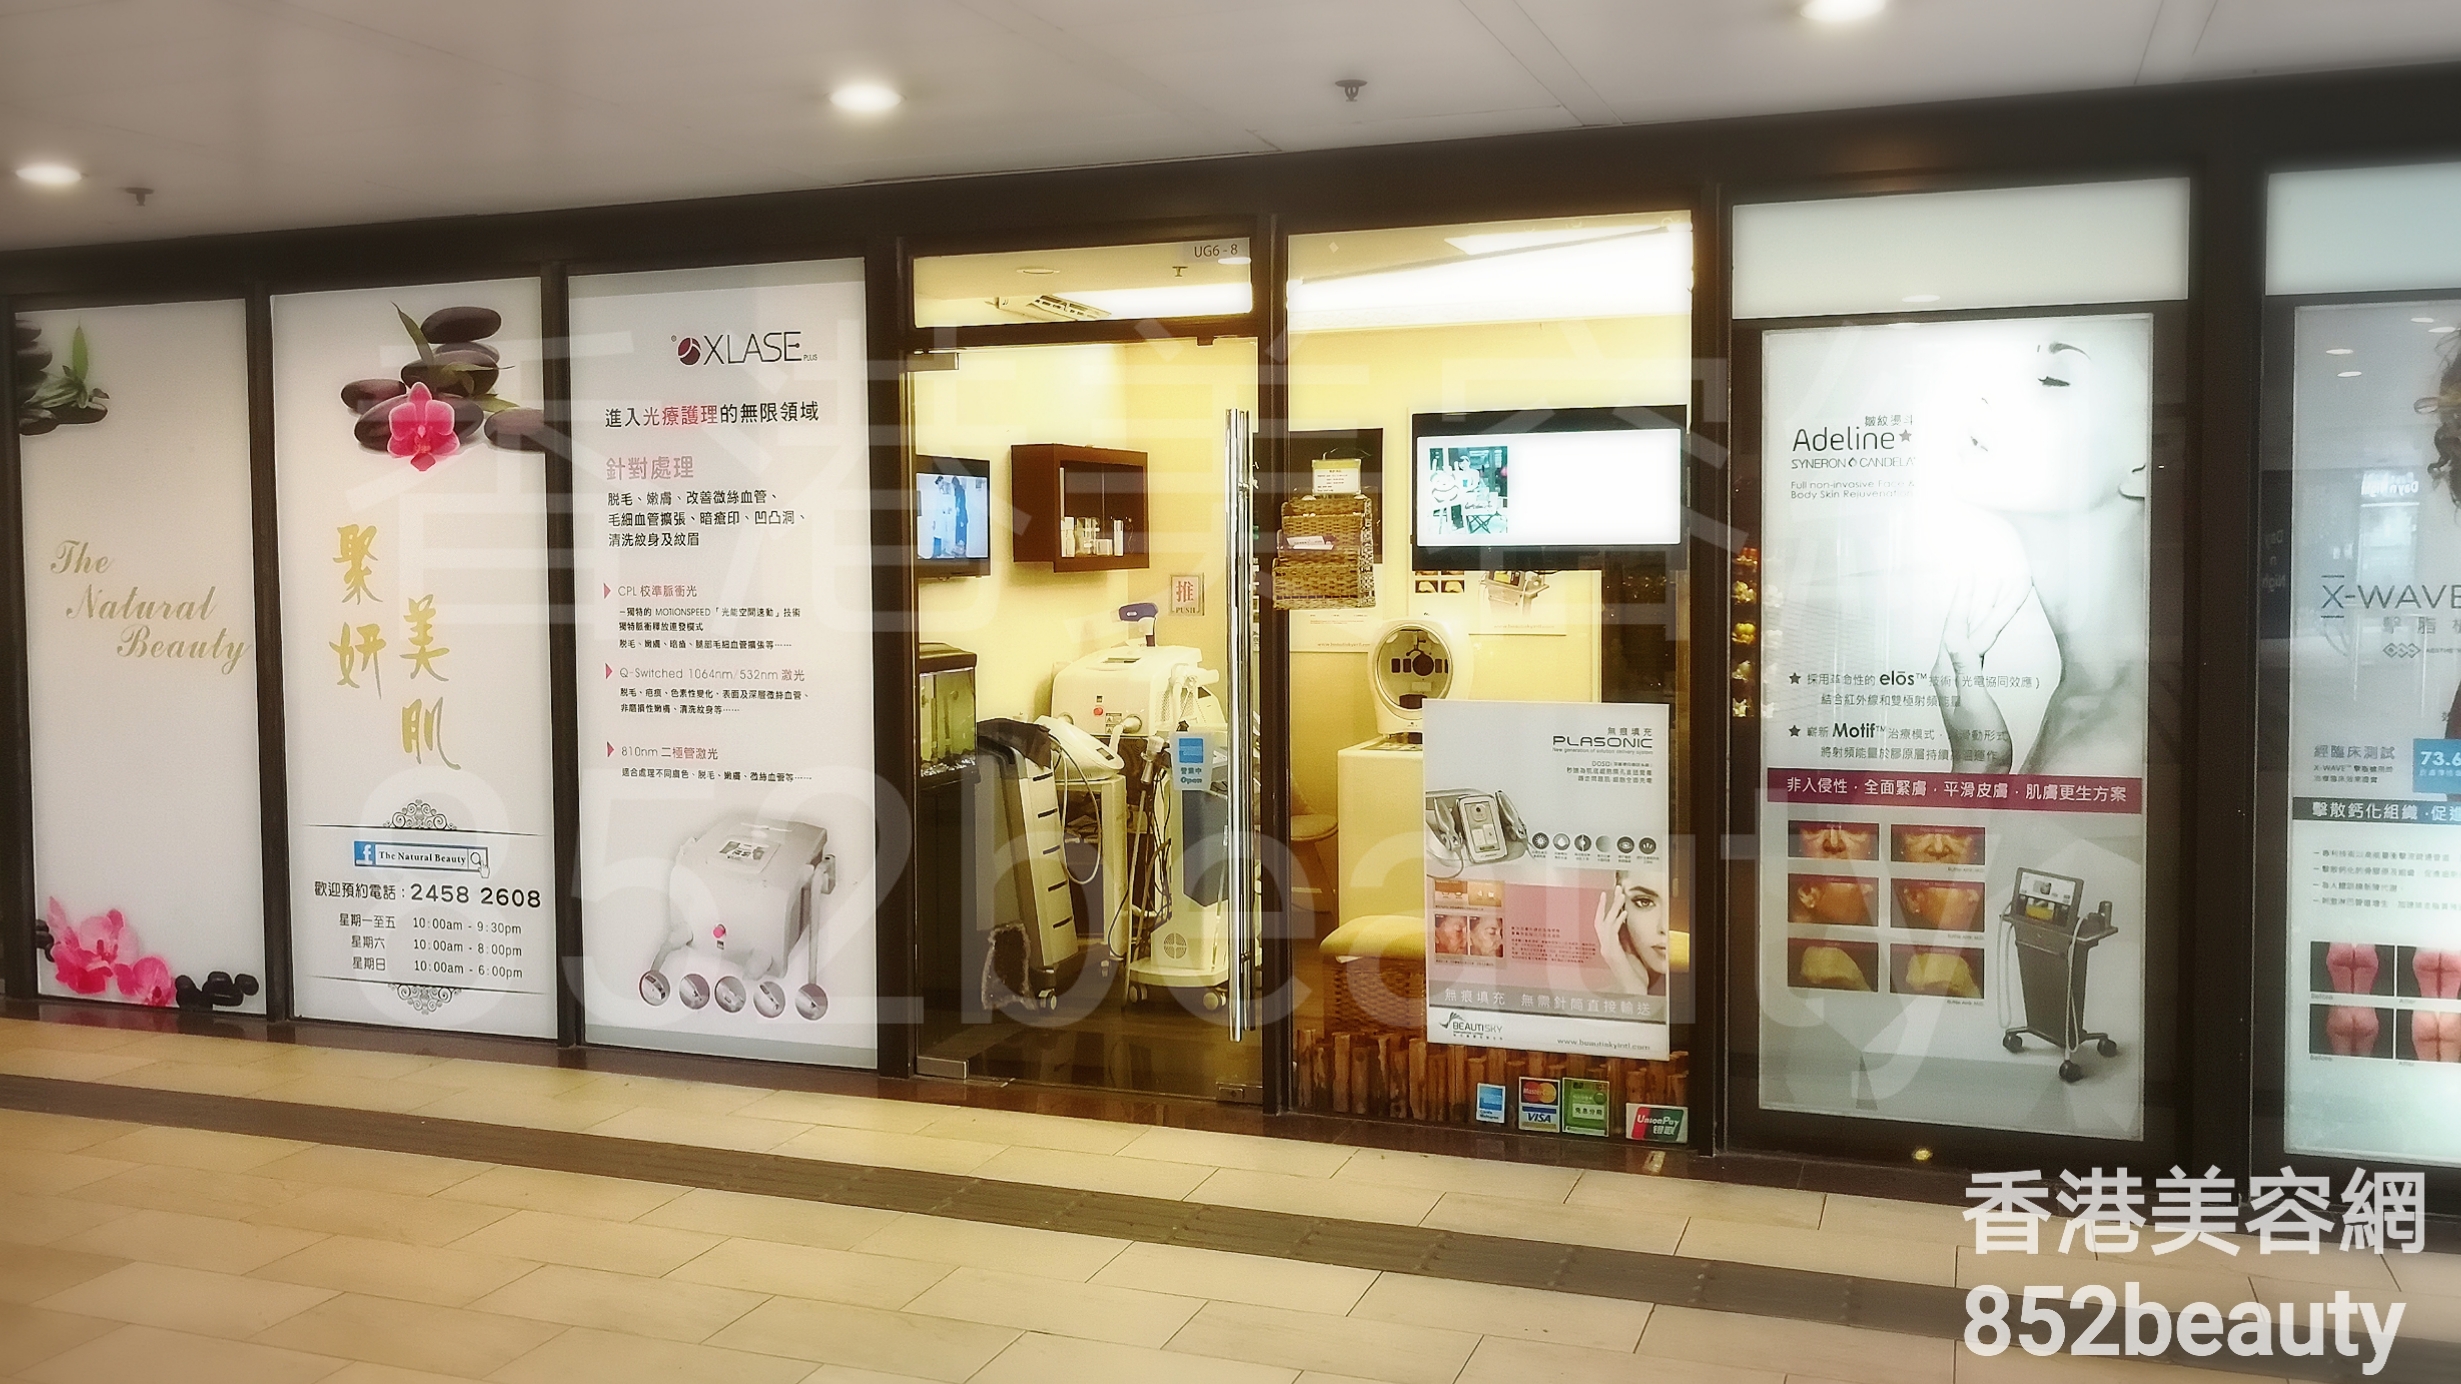 Massage/SPA: 聚妍美肌 The Natural Beauty (屯門總店)